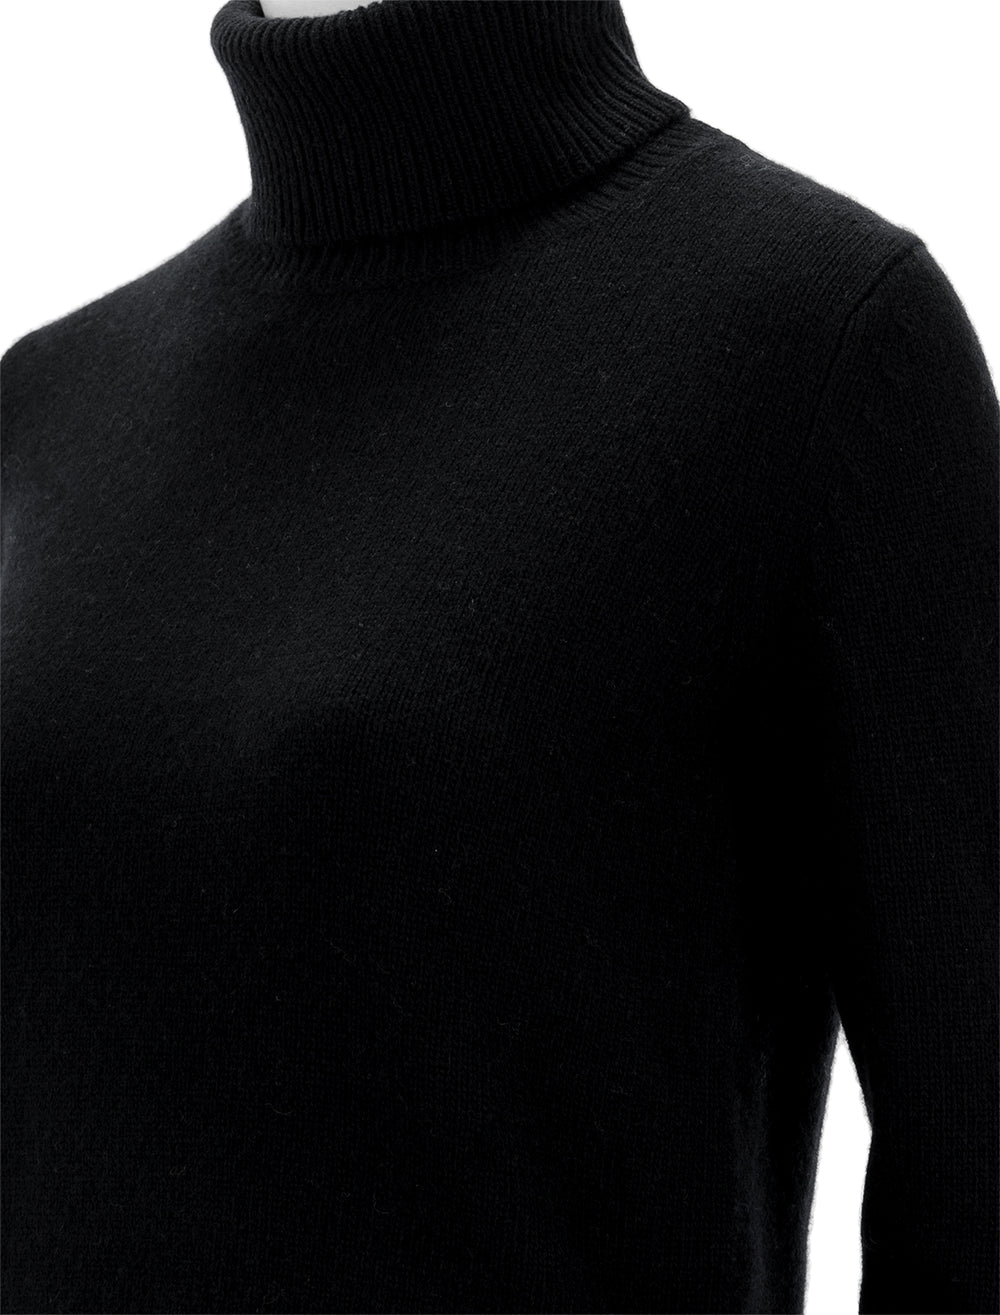 Close-up view of Nili Lotan's hollyn sweater in black.